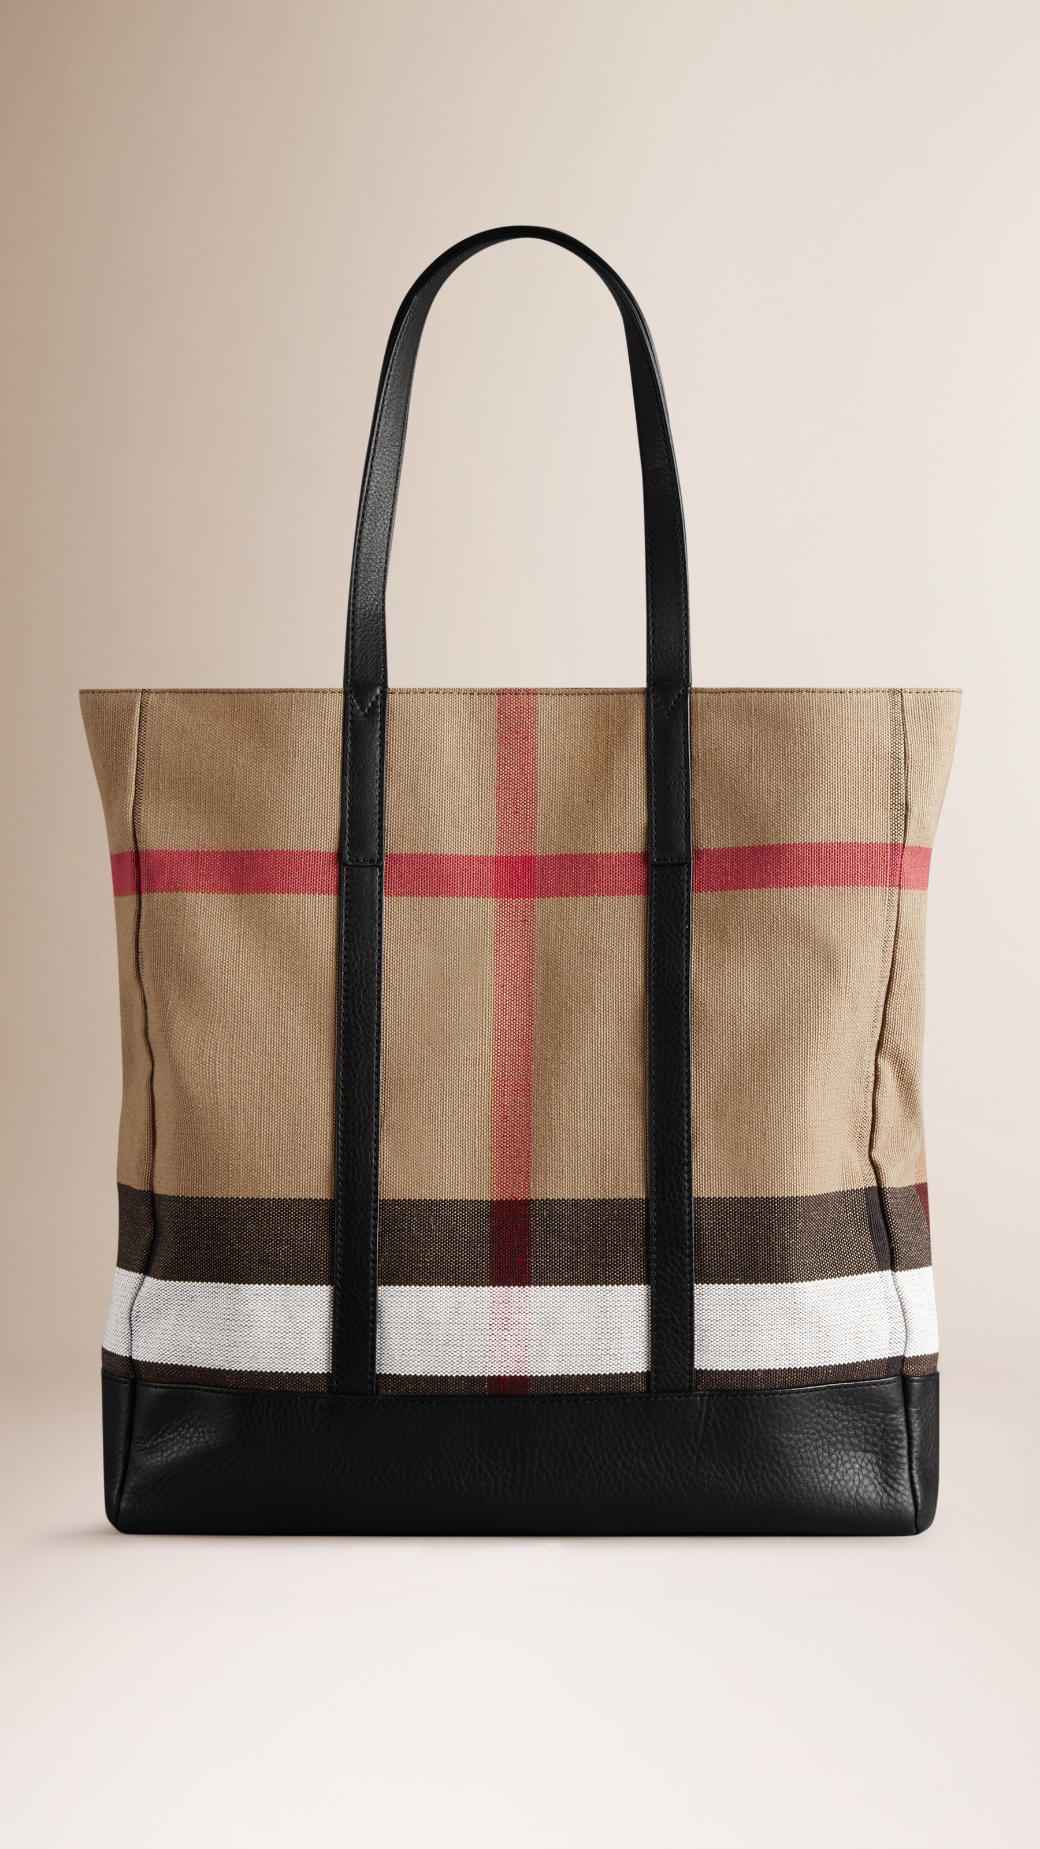 Lyst - Burberry Small Canvas Check And Leather Tote Bag in Black for Men